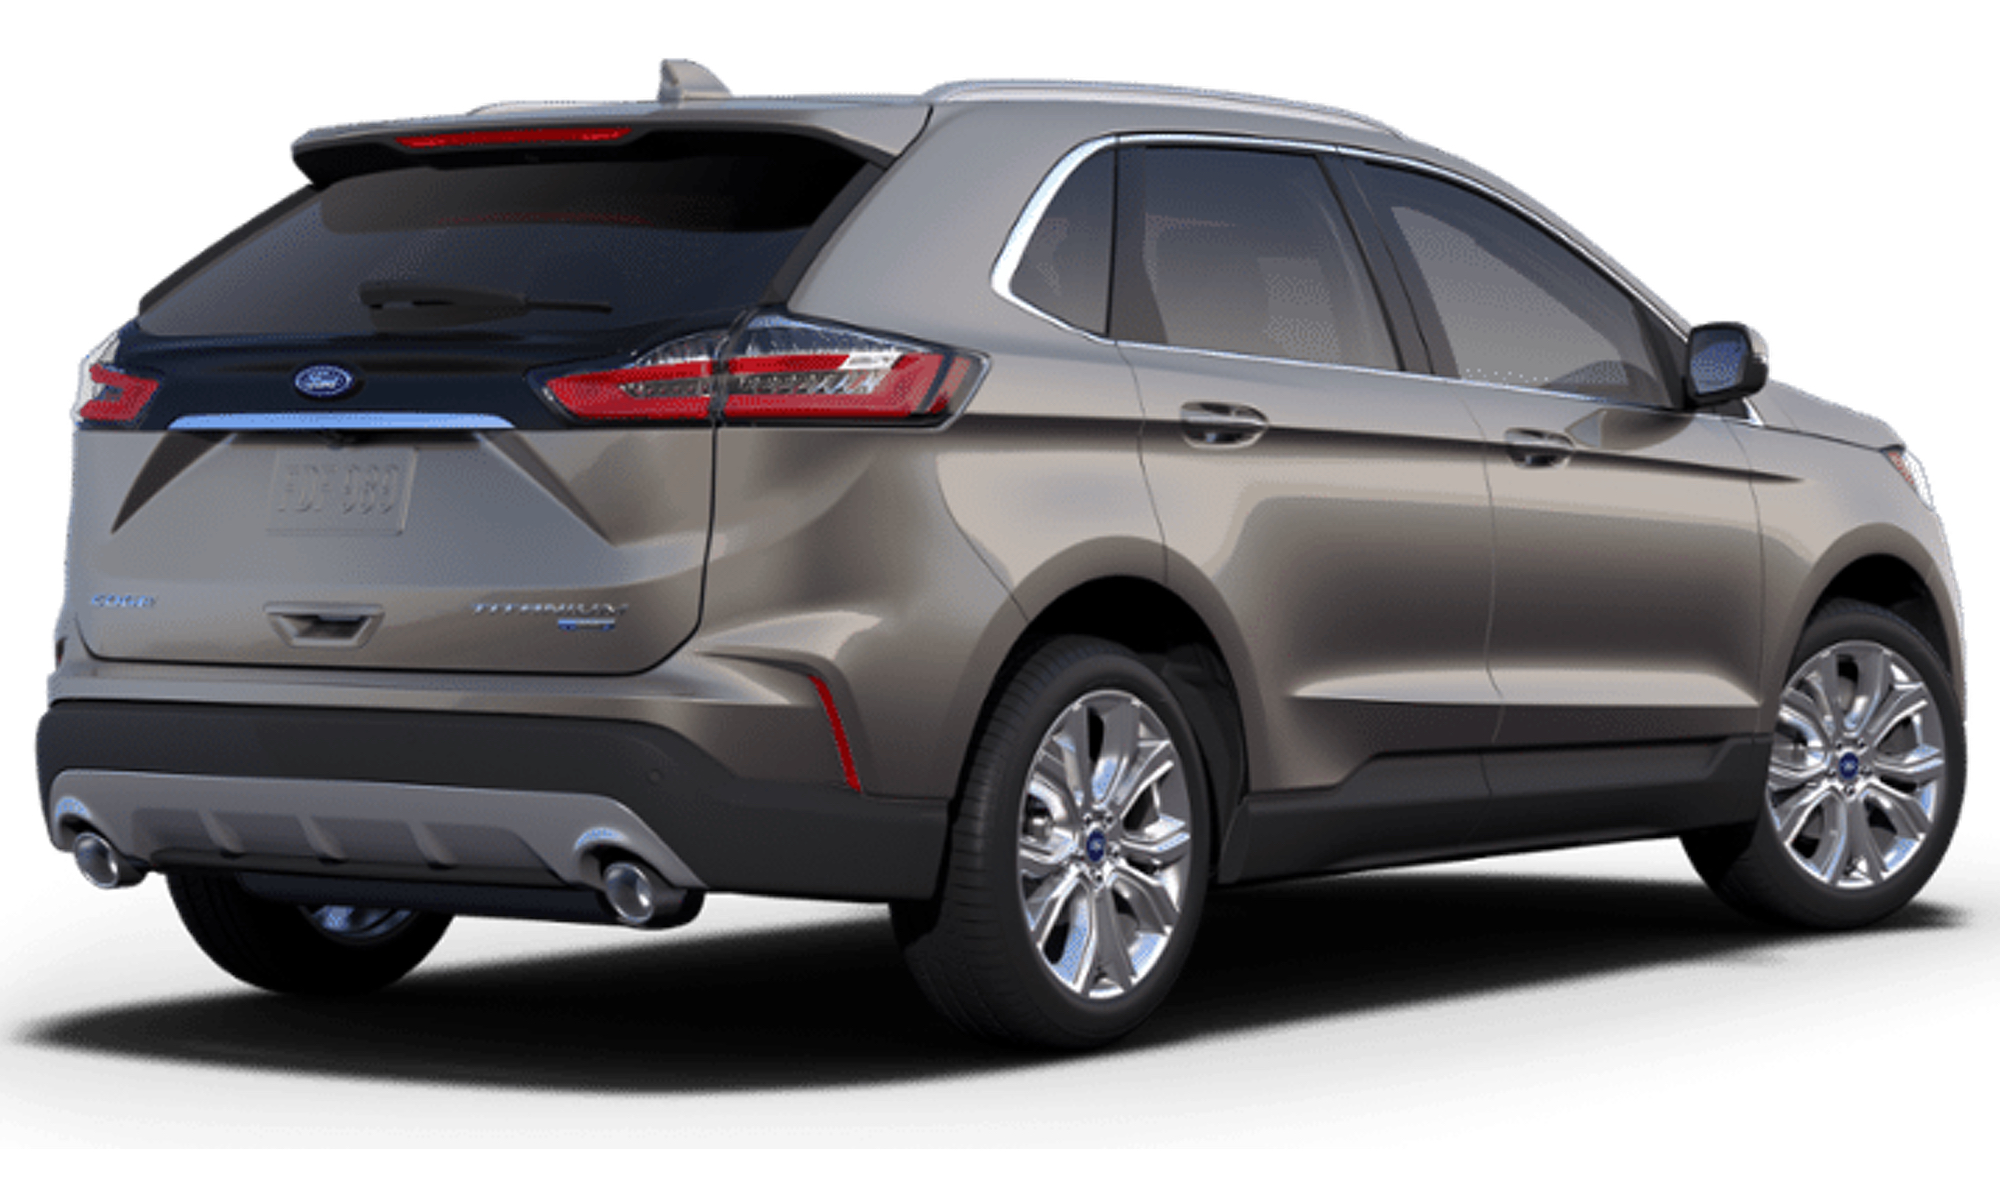 The New Stone Gray Color For The 2019 Ford Edge